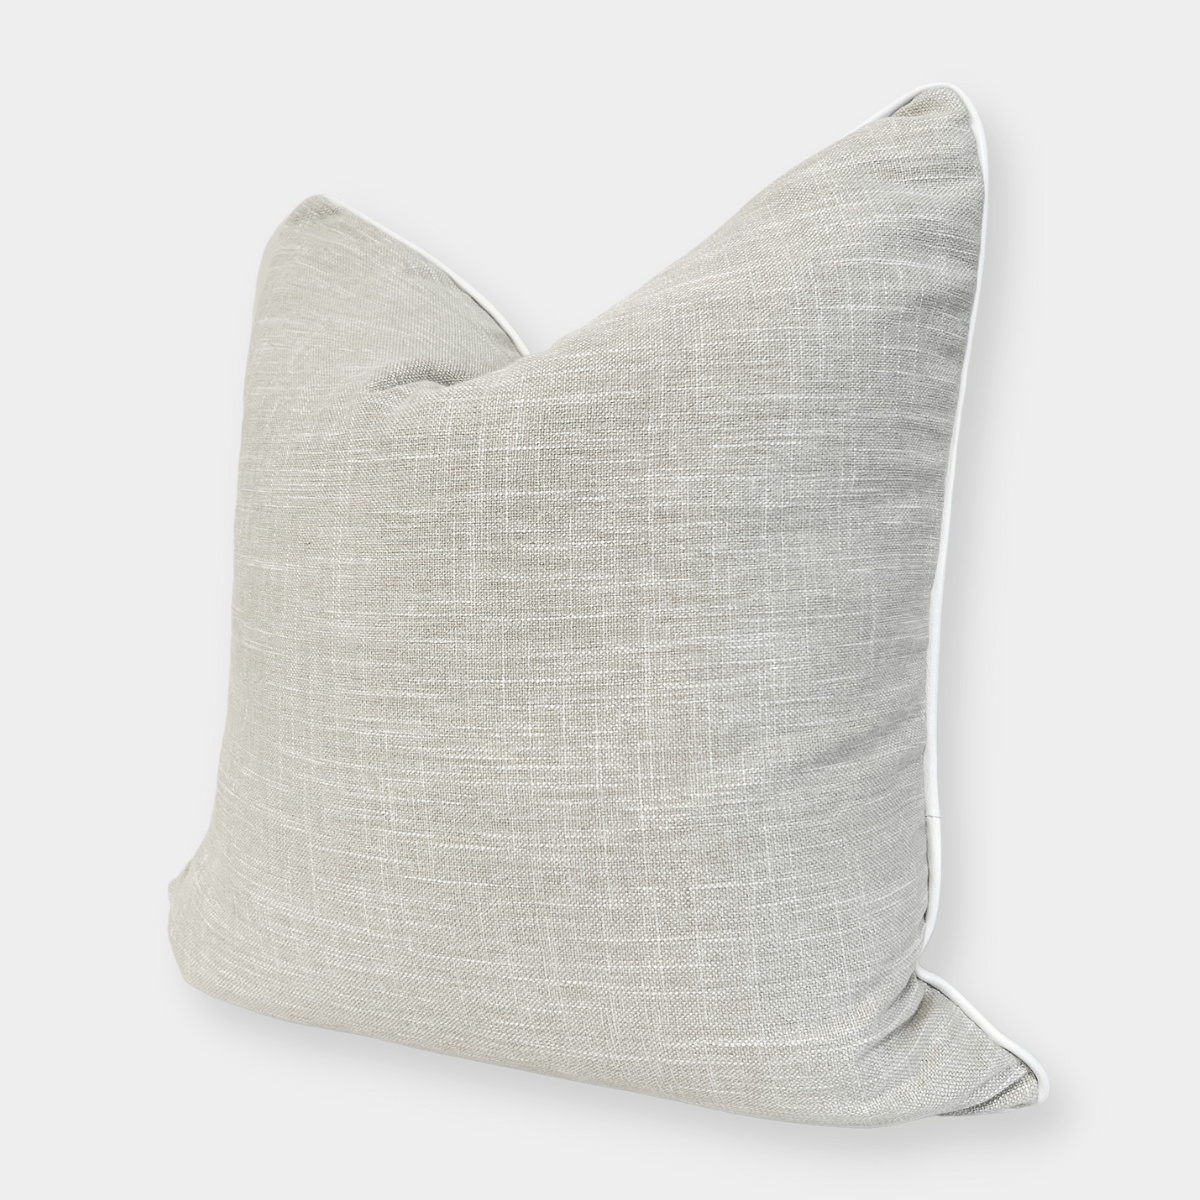 norsuHOME Cushions norsuHOME Cushion, Haze Fog with White Piping (7838133354745)